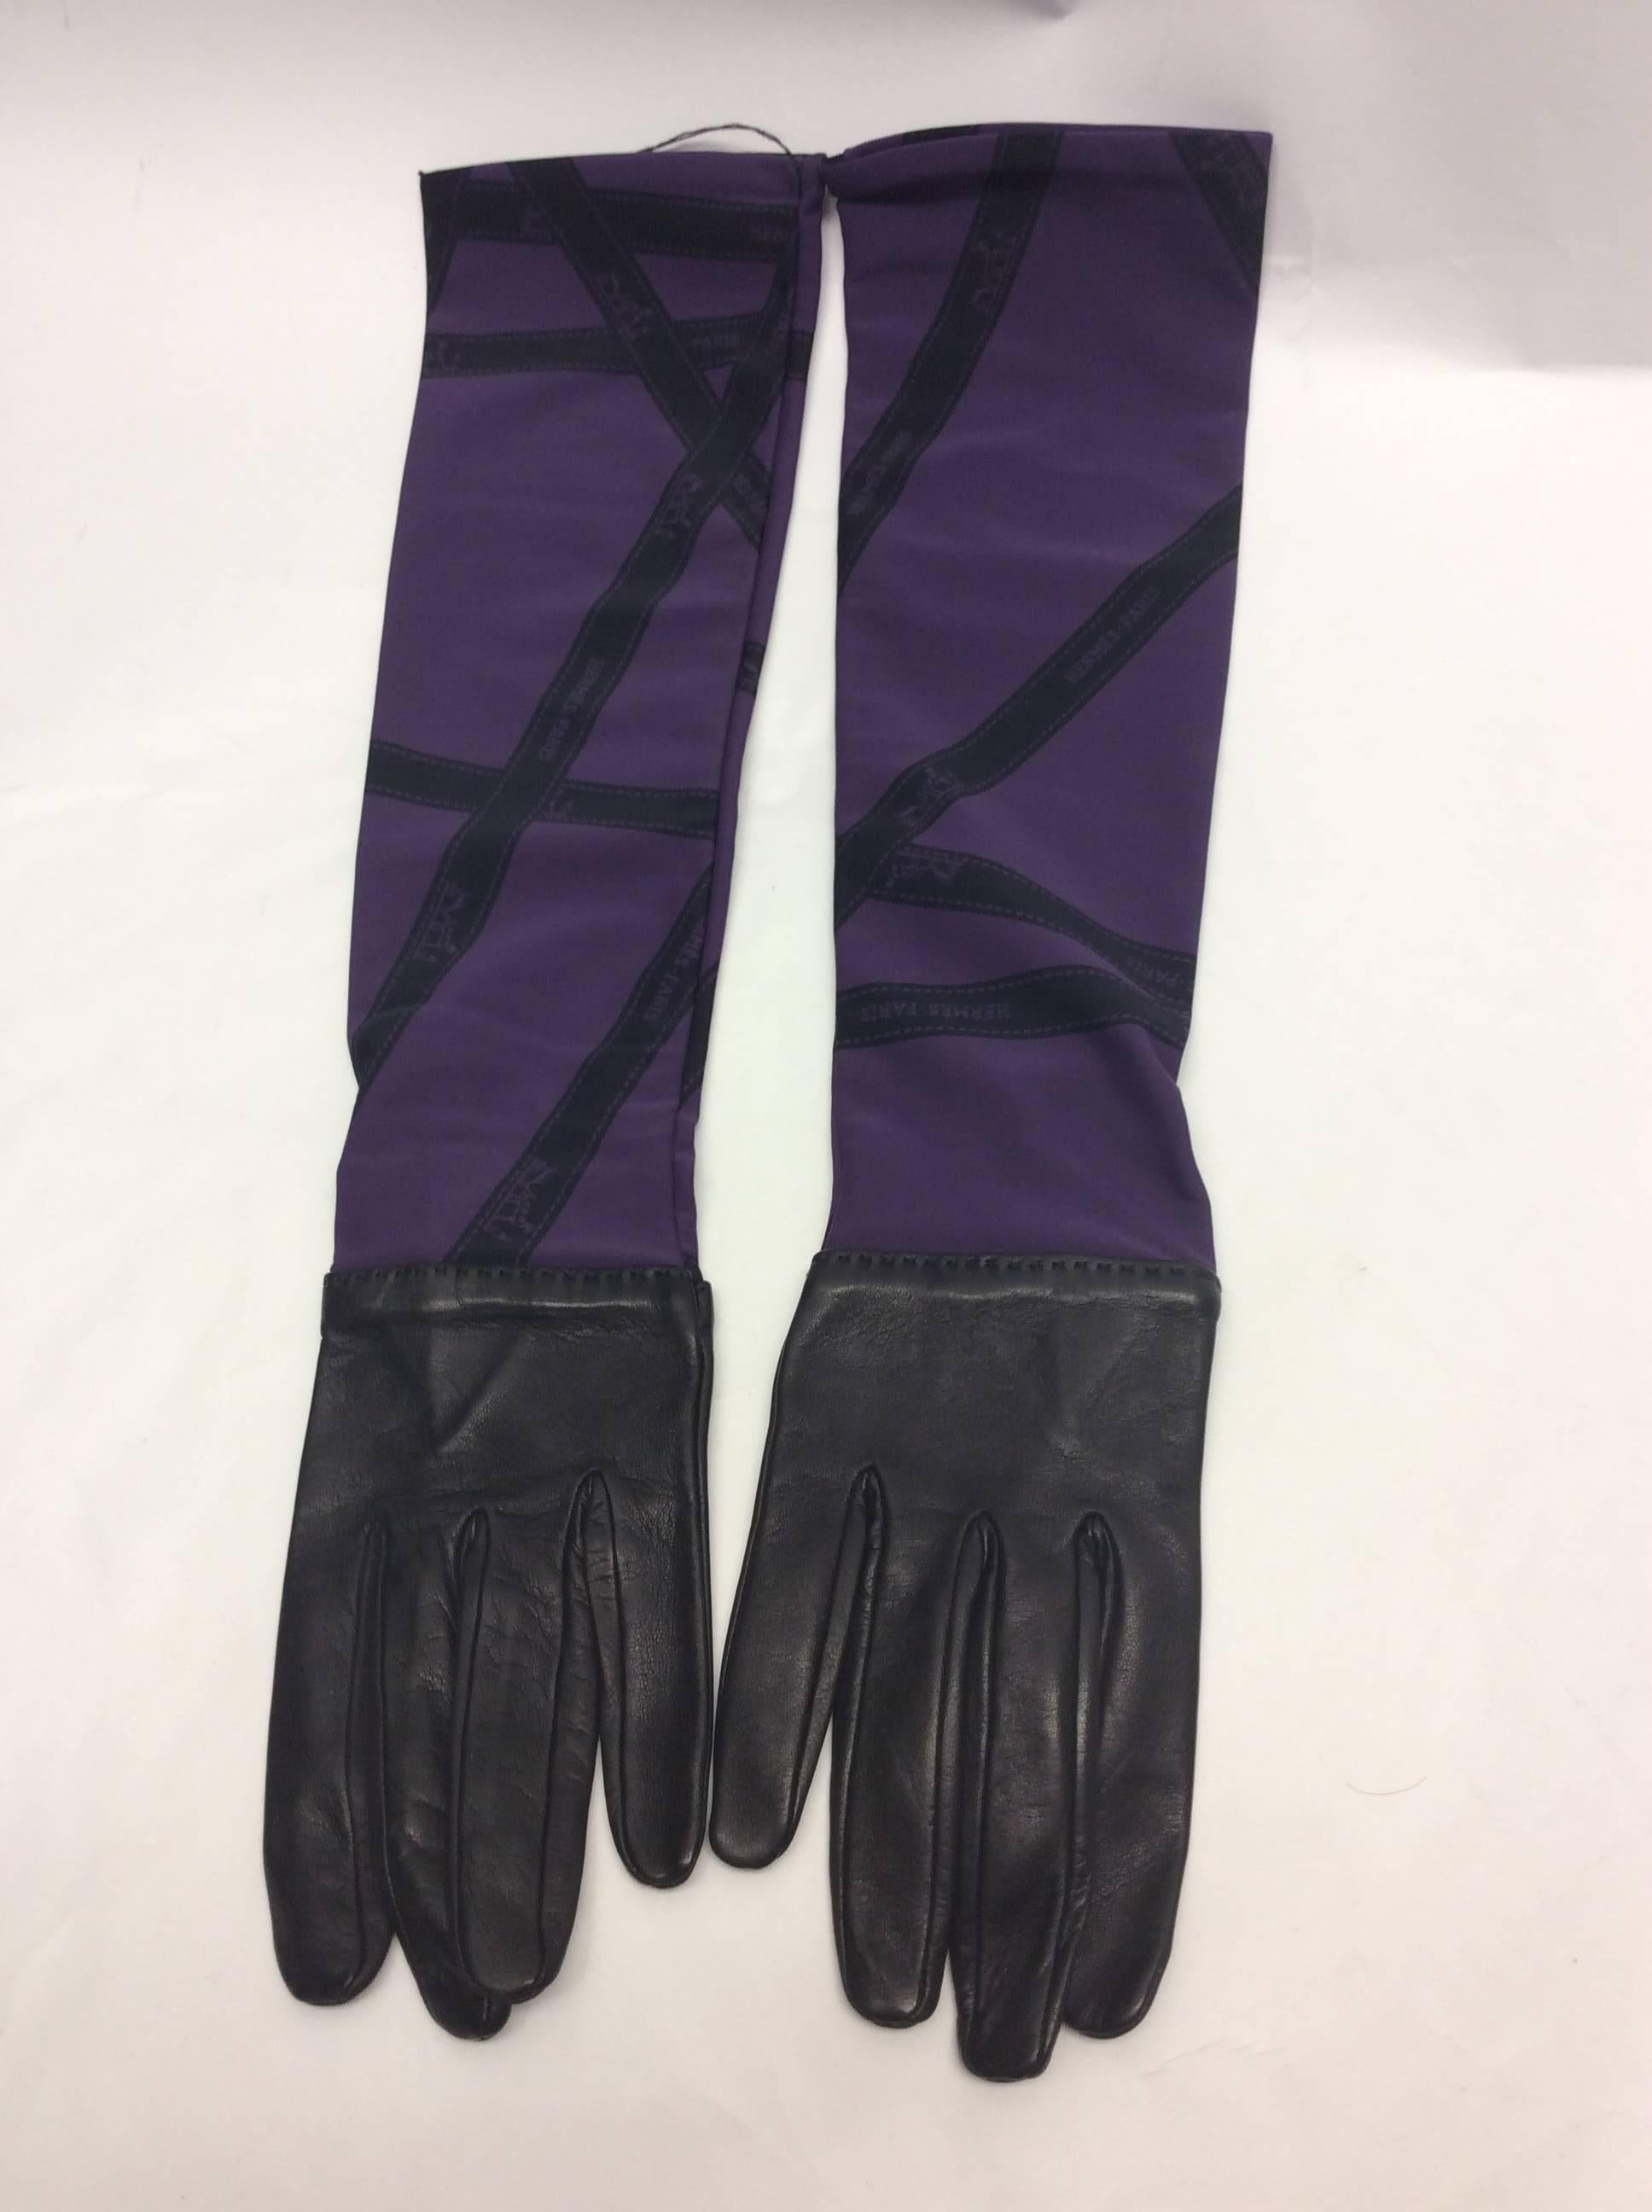 Hermes Leather And Silk Printed Gloves
Purple and black printed silk, black leather
17.5 inches long
Features kidskin and lamb
$599
Made in France